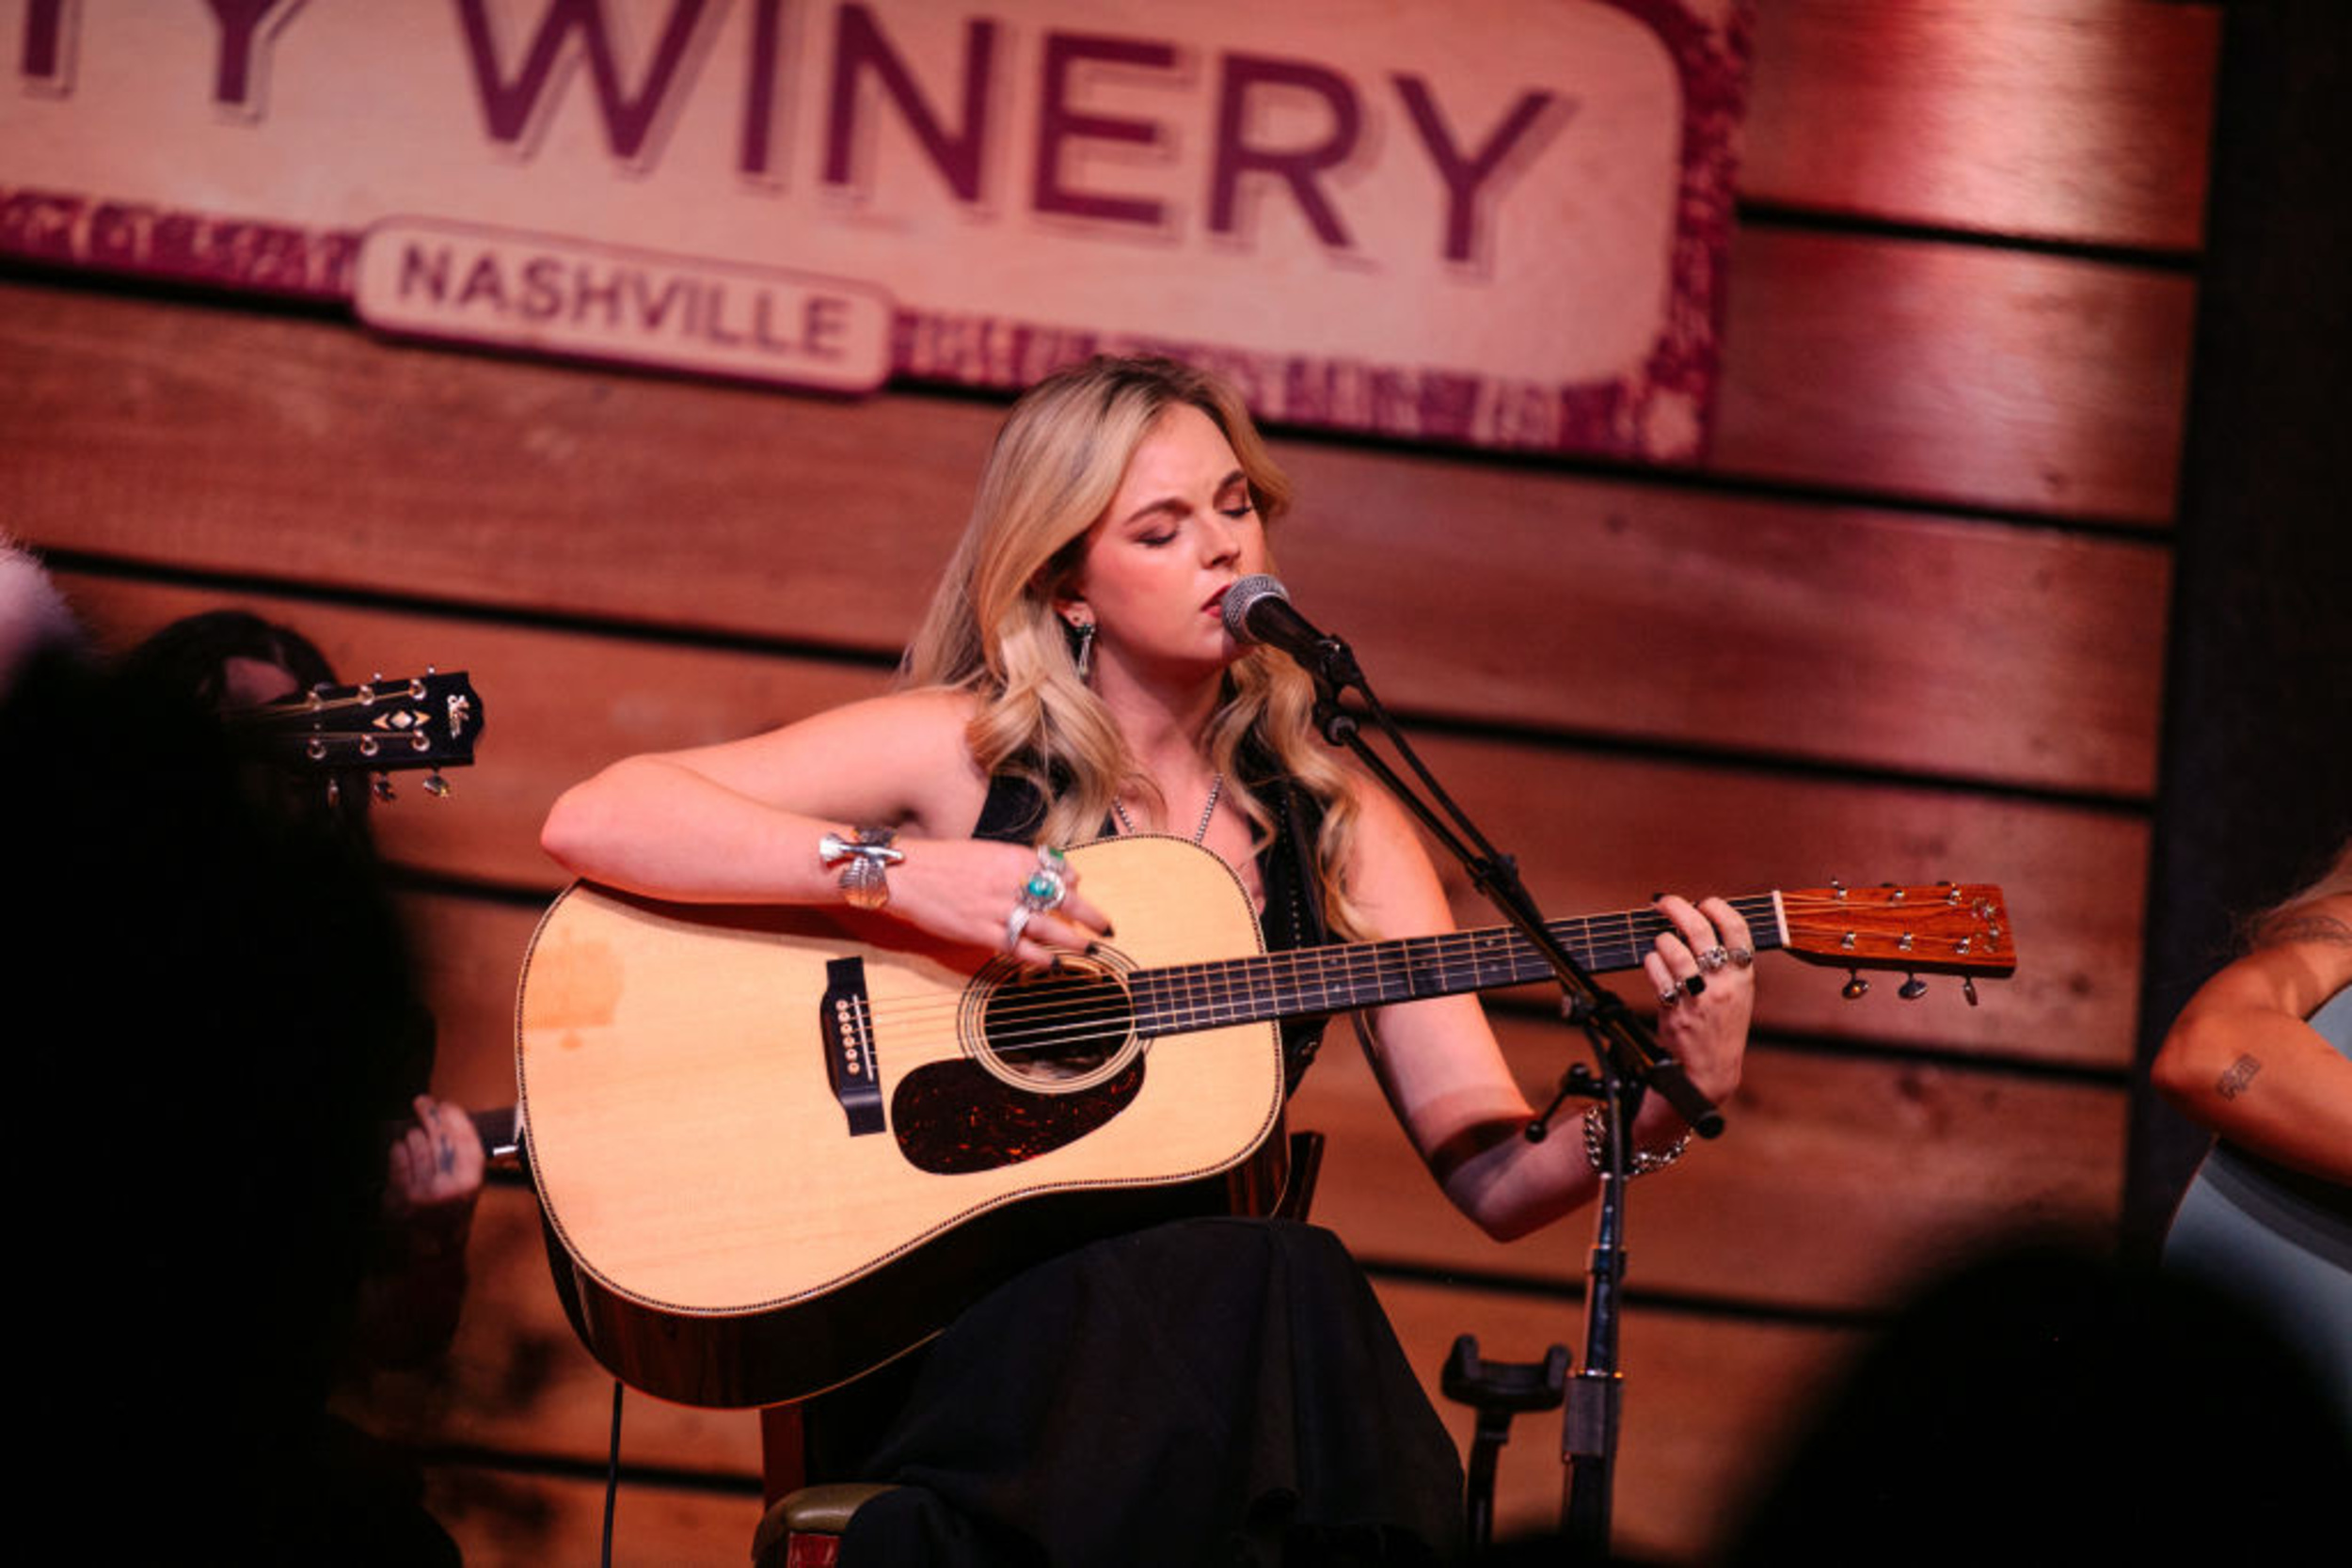 <p>After trying her hand at acting, Karley Scott Collins moved to Nashville in 2019 after she scored a publishing deal. In the years following, she's been writing and honing her sound, and the results are impressive. Listen to "Marlboro Reds" or "Heavy Metal" for an idea of her rock-inflected vibe. </p><p>You may also like: <a href='https://www.yardbarker.com/entertainment/articles/20_famous_models_discovered_in_everyday_life/s1__40212666'>20 famous models discovered in everyday life</a></p>